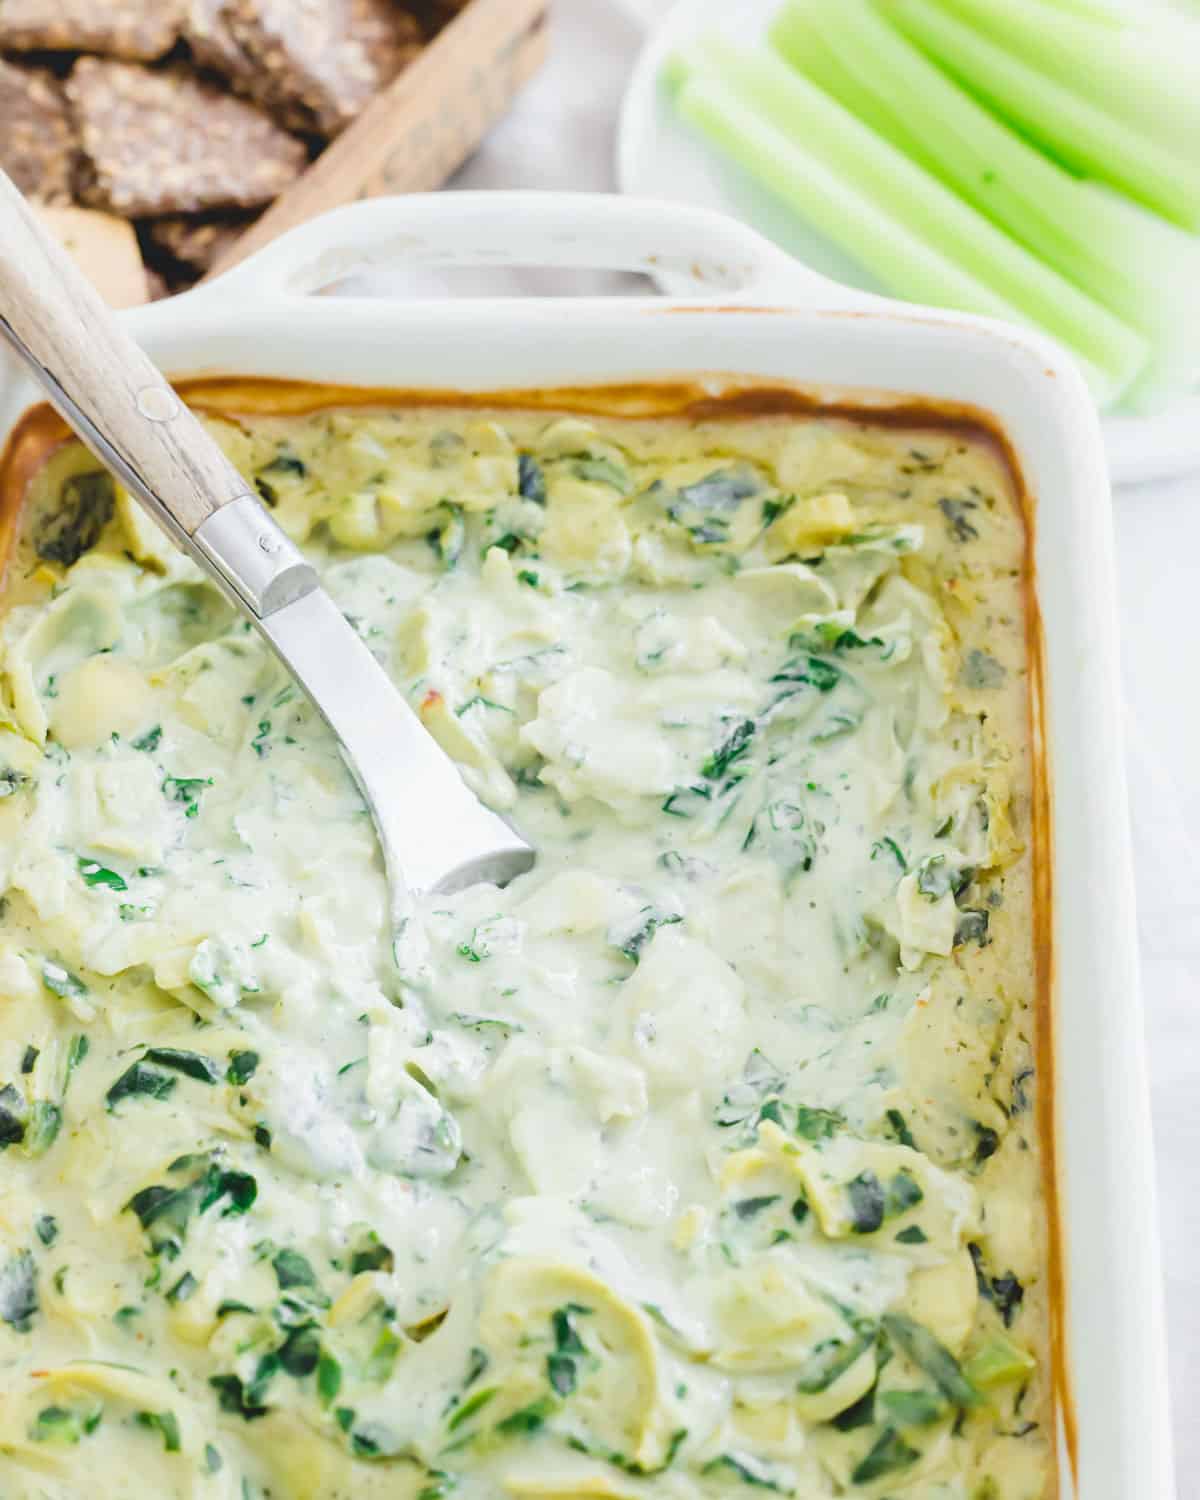 Baking dish of creamy vegan spinach and artichoke dip with a serving spoon.